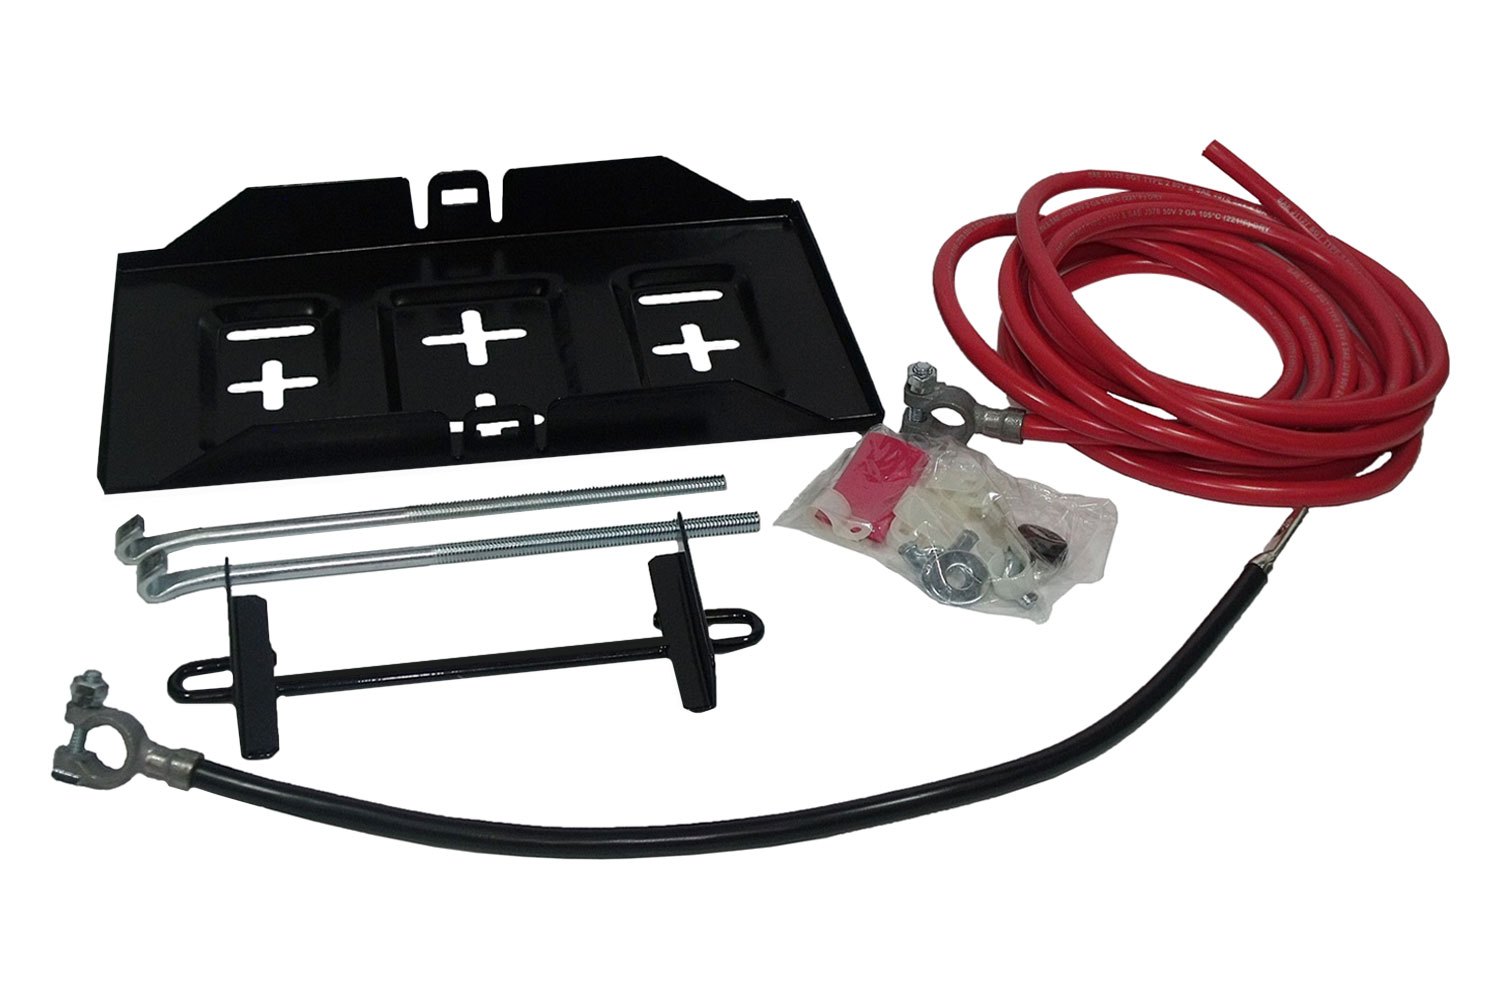 Mustang Battery Relocation Kit. Релокатор для антенны. Mustang Battery Relocation Kit 2015-current. Must Relocator Kit. Battery kit